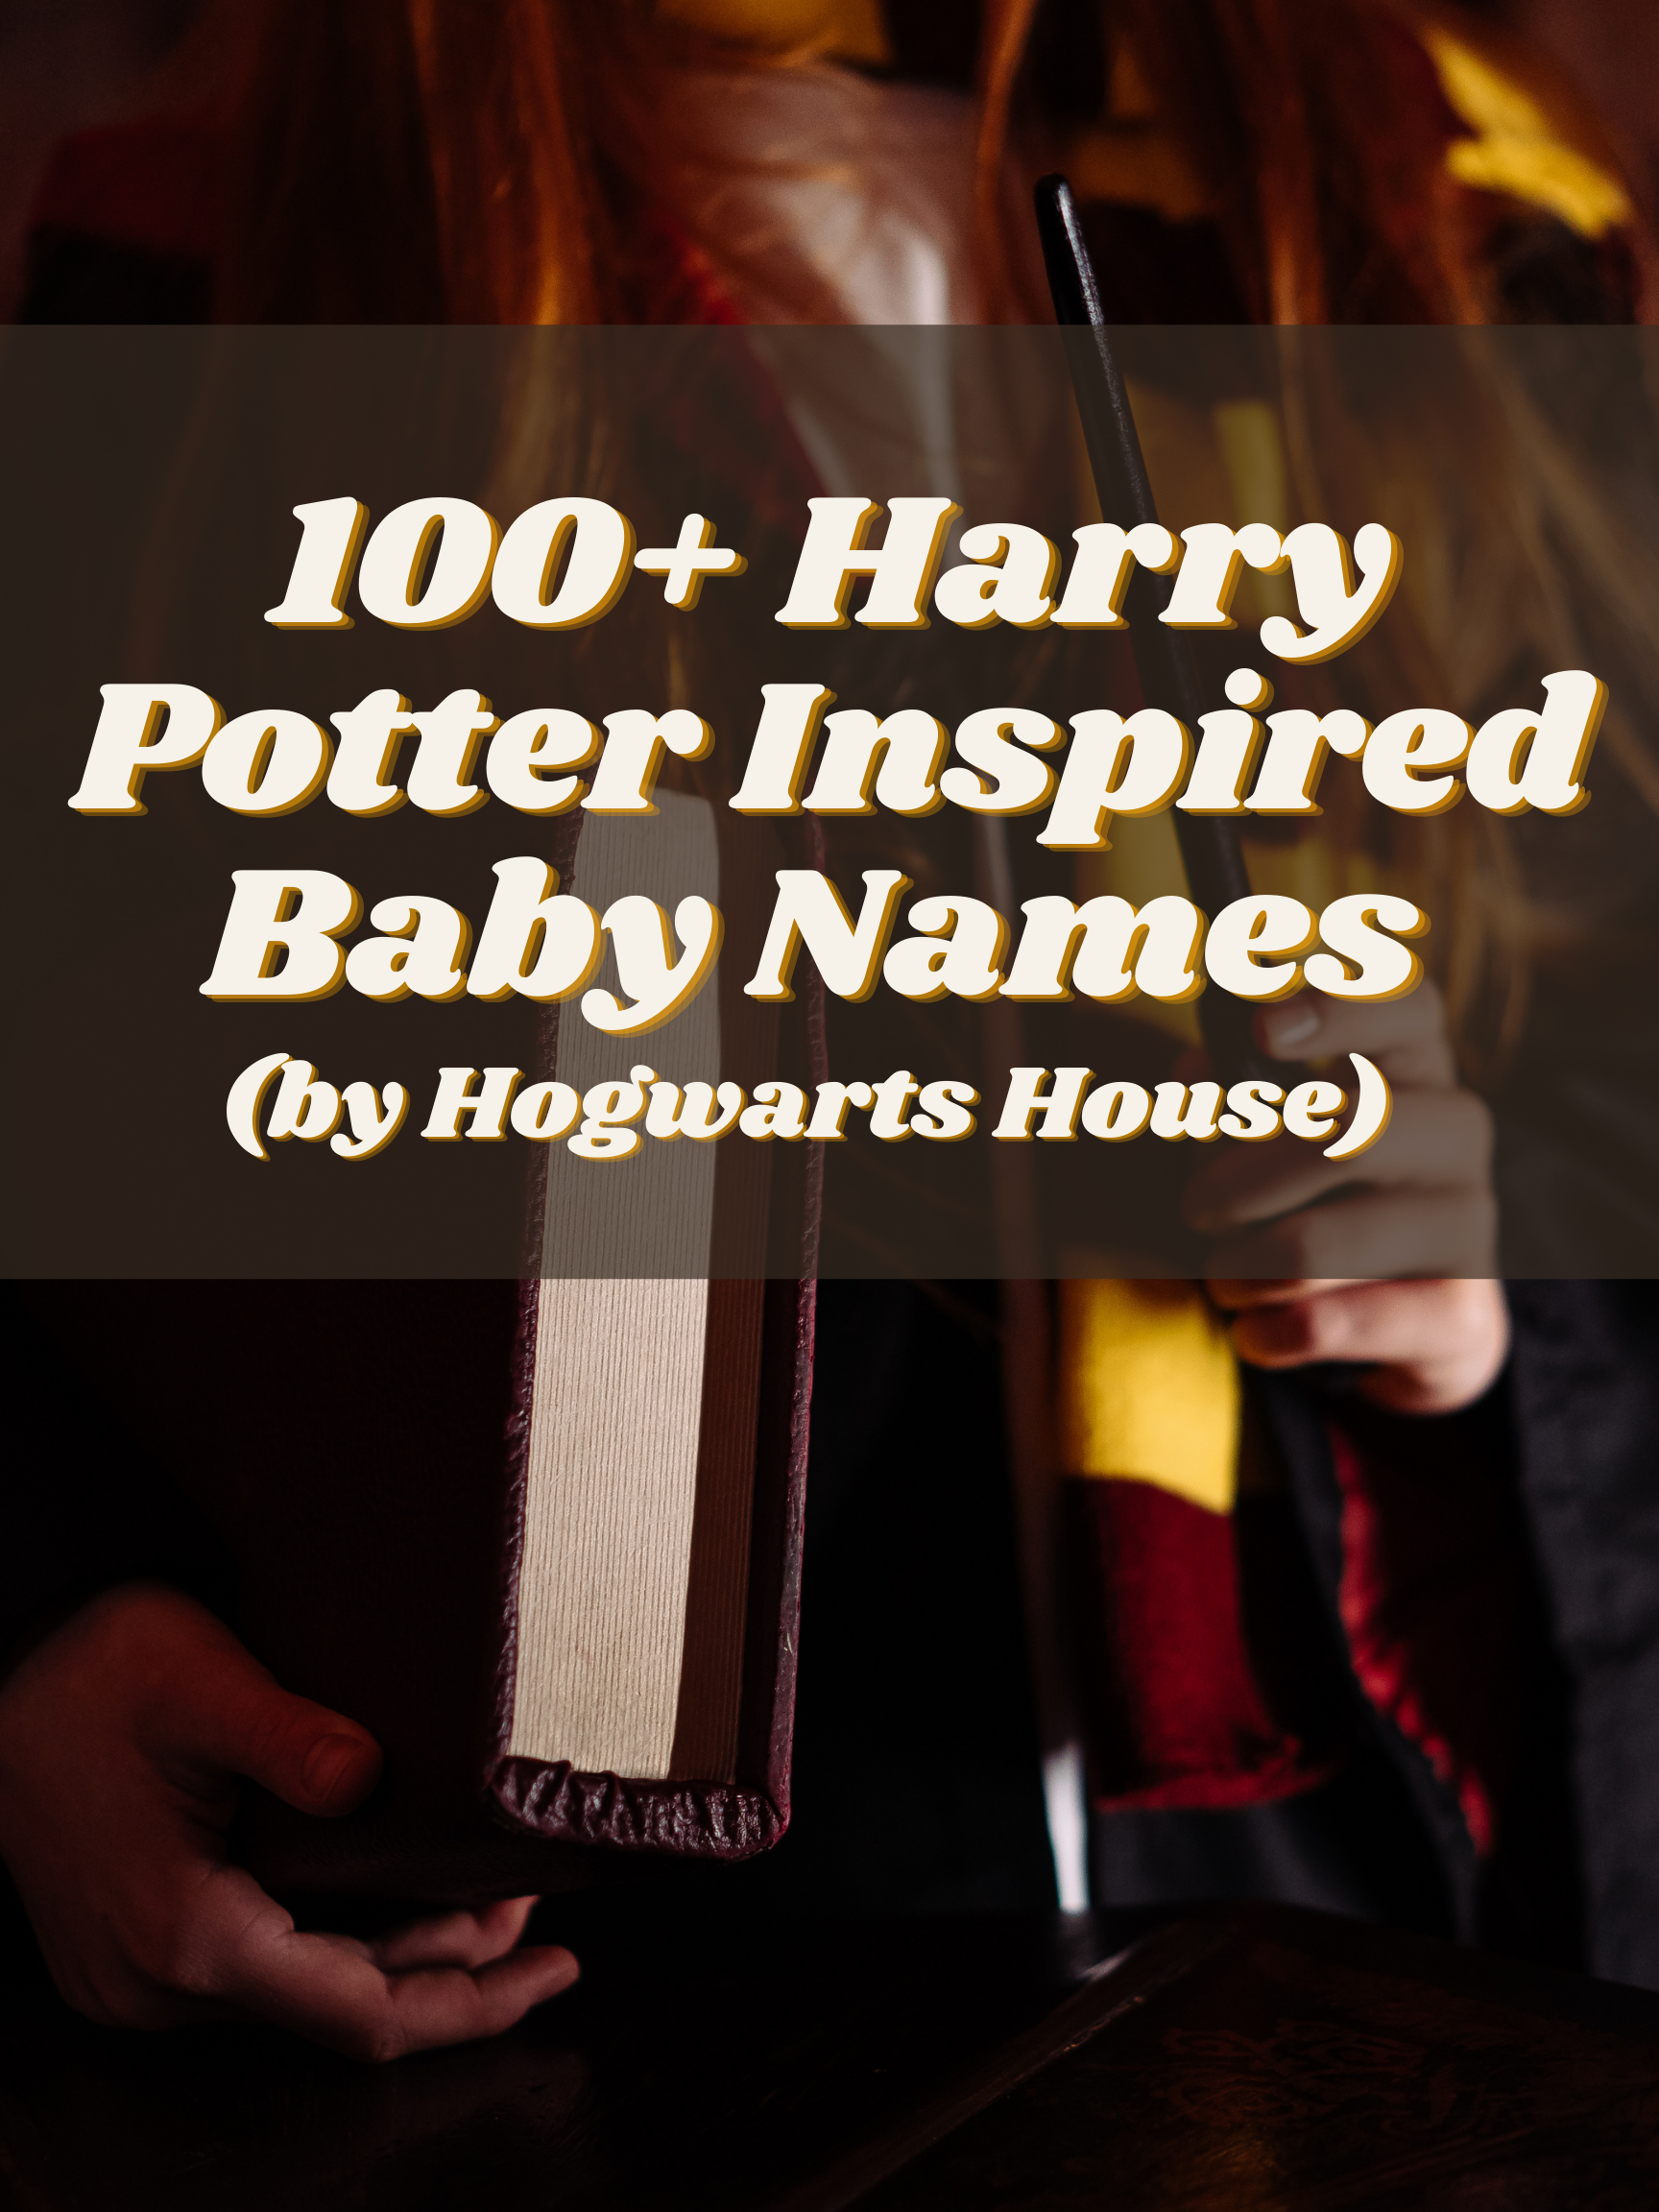 100+ Harry Potter Inspired Baby Names